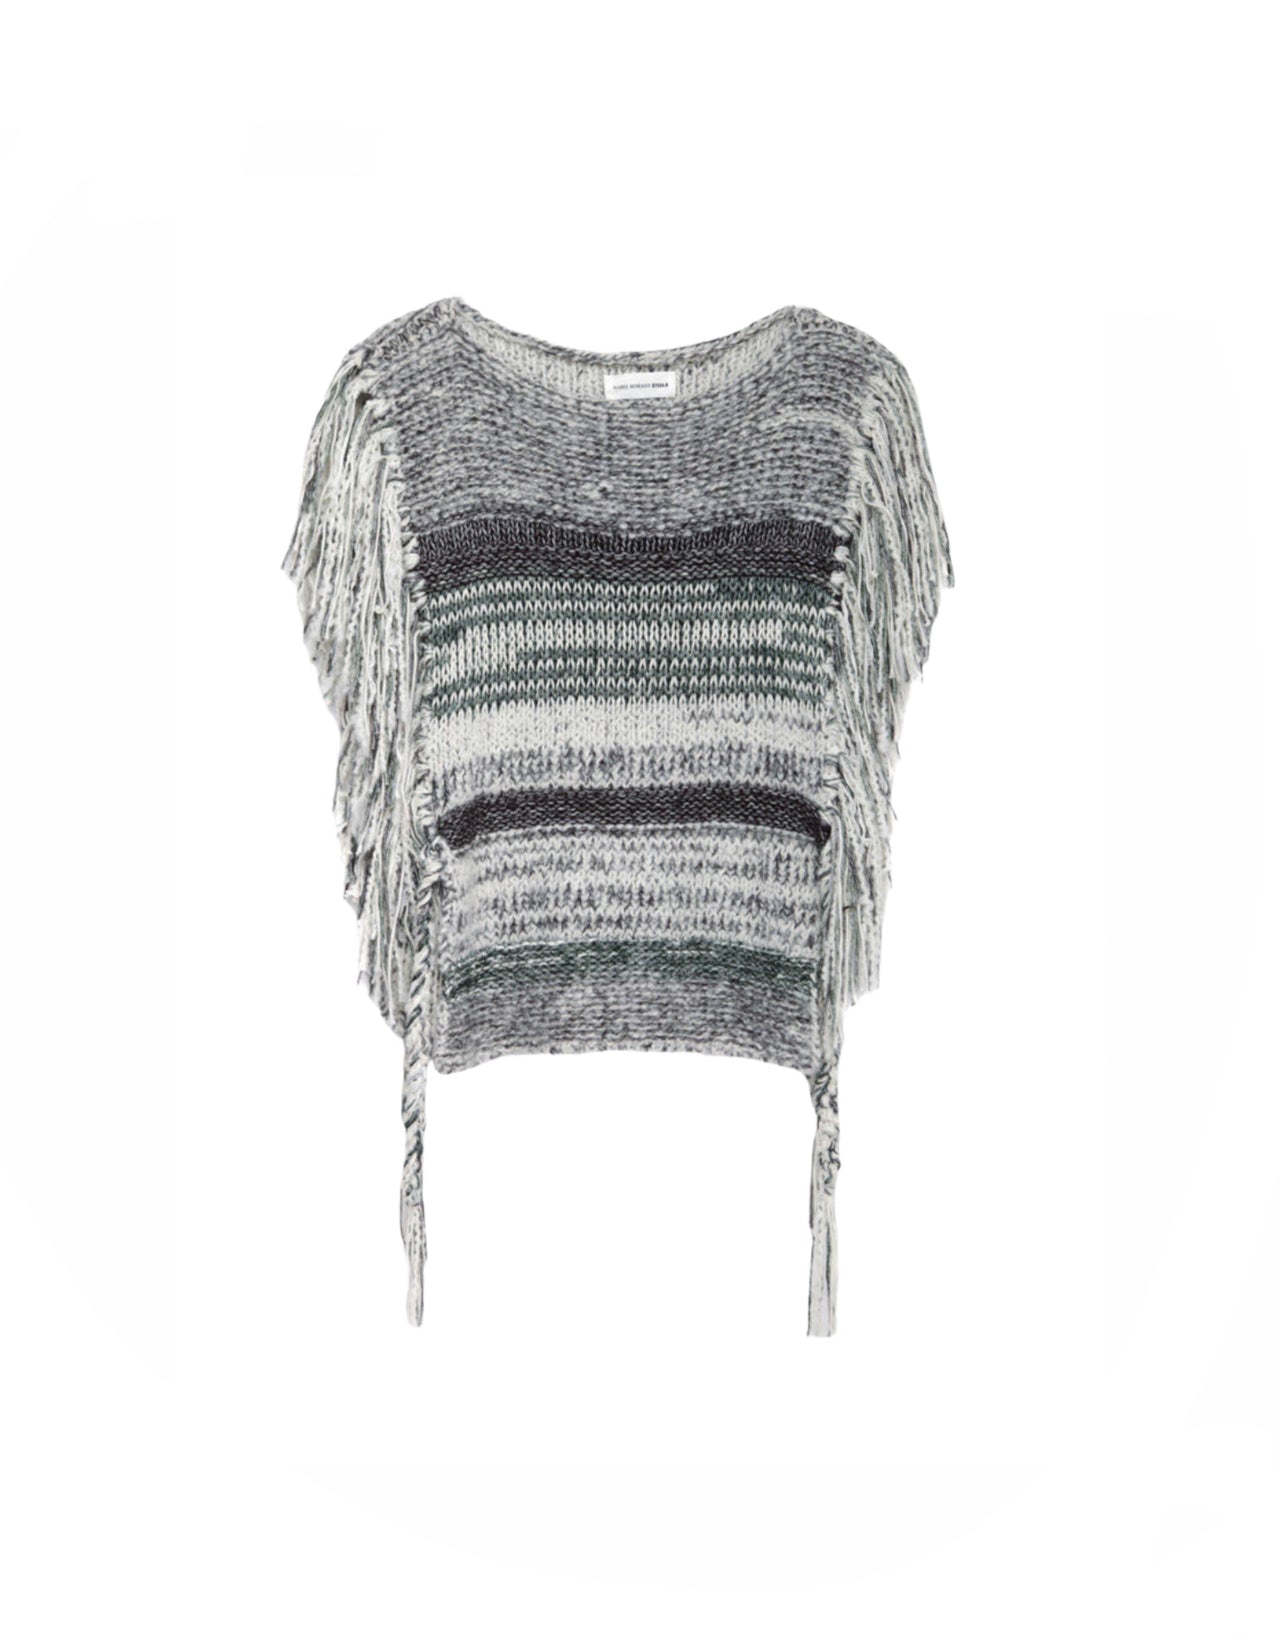 Isabel Marant Grey Knitted Poncho Top